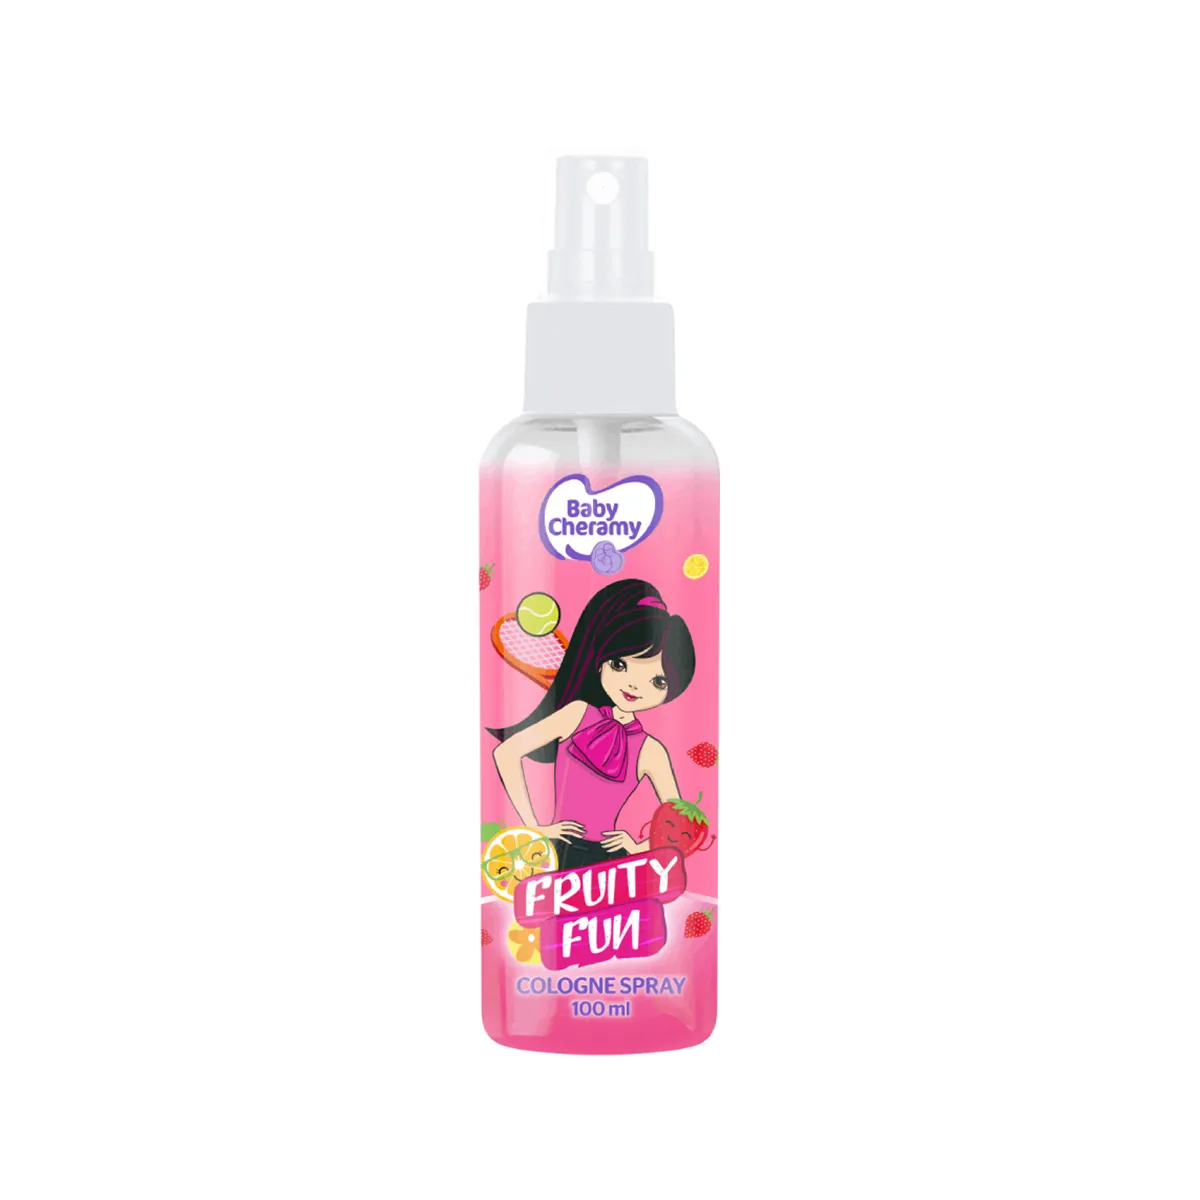 First product image of Baby Cheramy Tweens Cologne Fruity Fun 100ml